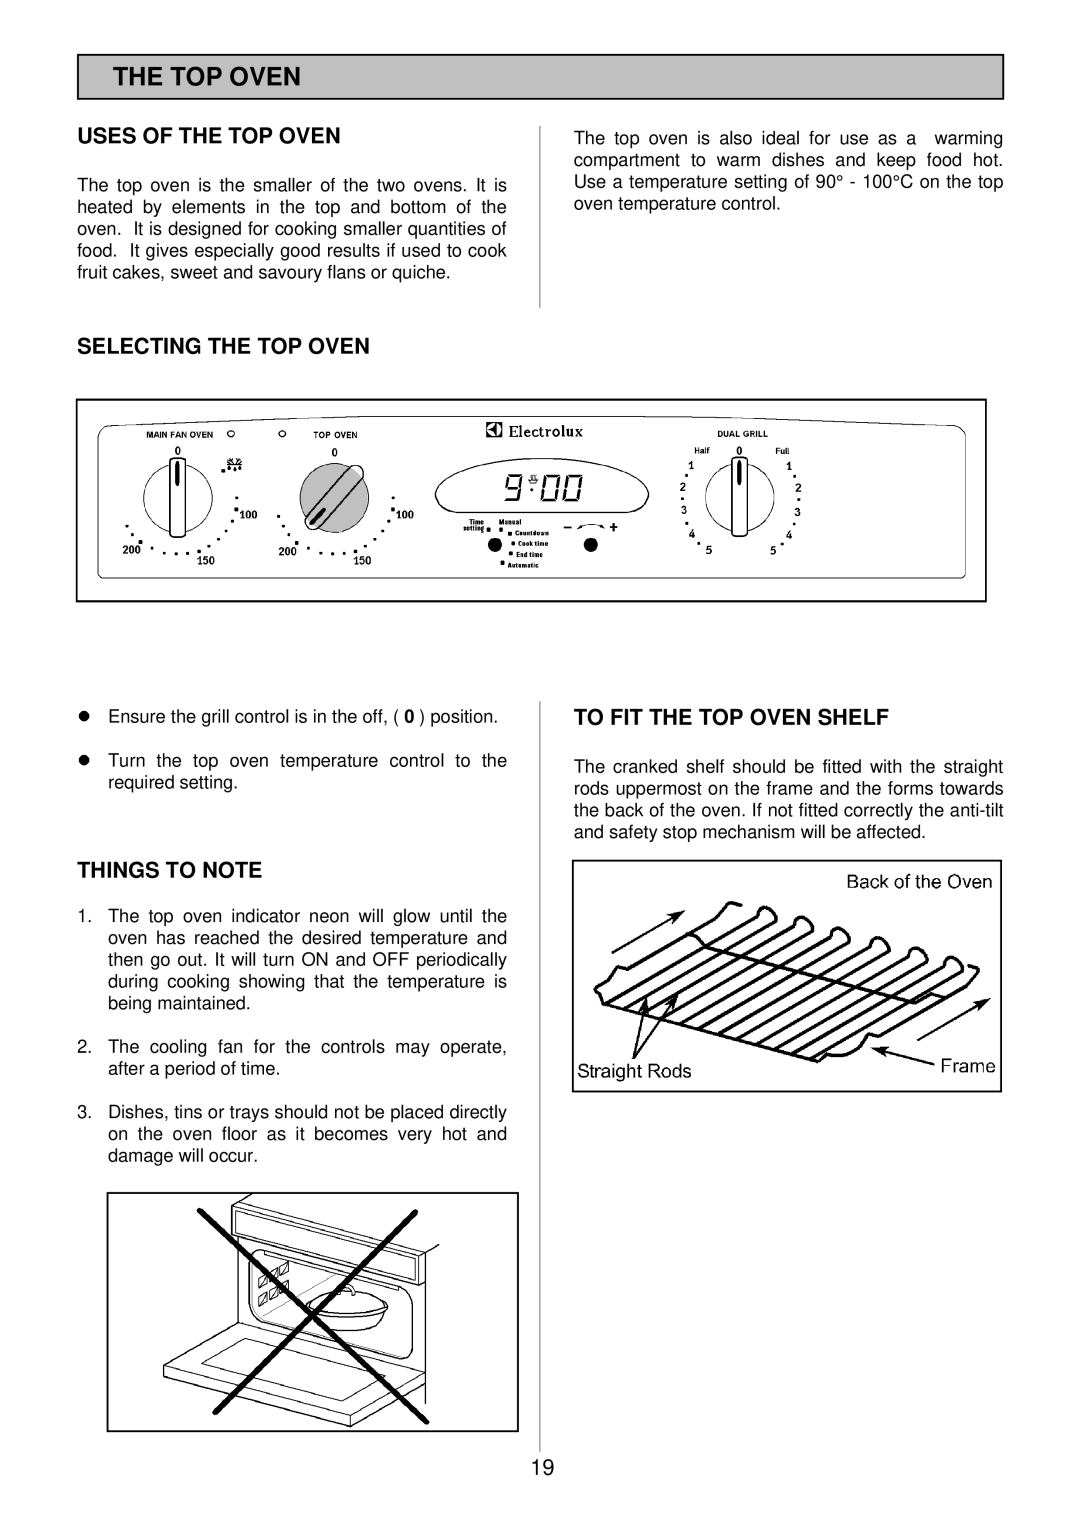 Electrolux 985 manual Uses of the TOP Oven, Selecting the TOP Oven, To FIT the TOP Oven Shelf 